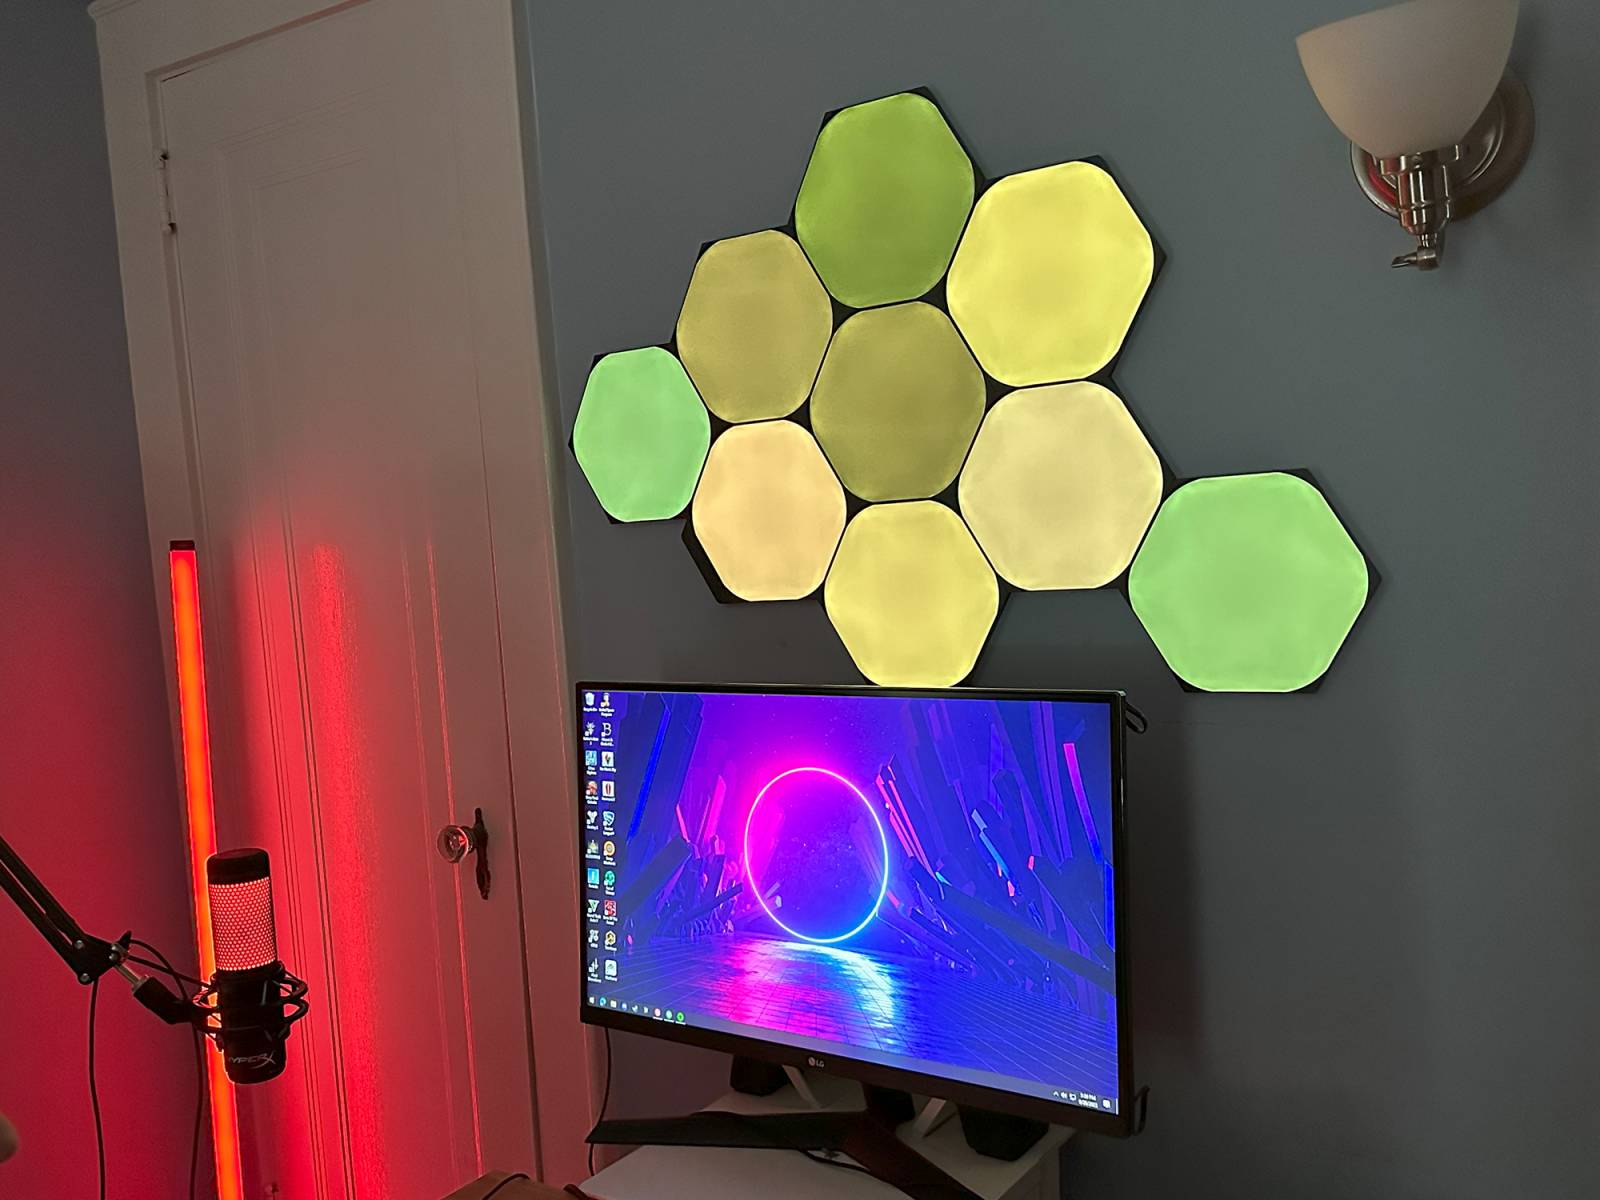 Nanoleaf Ultra Black Shapes Hexagons and Triangles Review: Dramatic Lighting Effects that Look Like Art When Not in Use